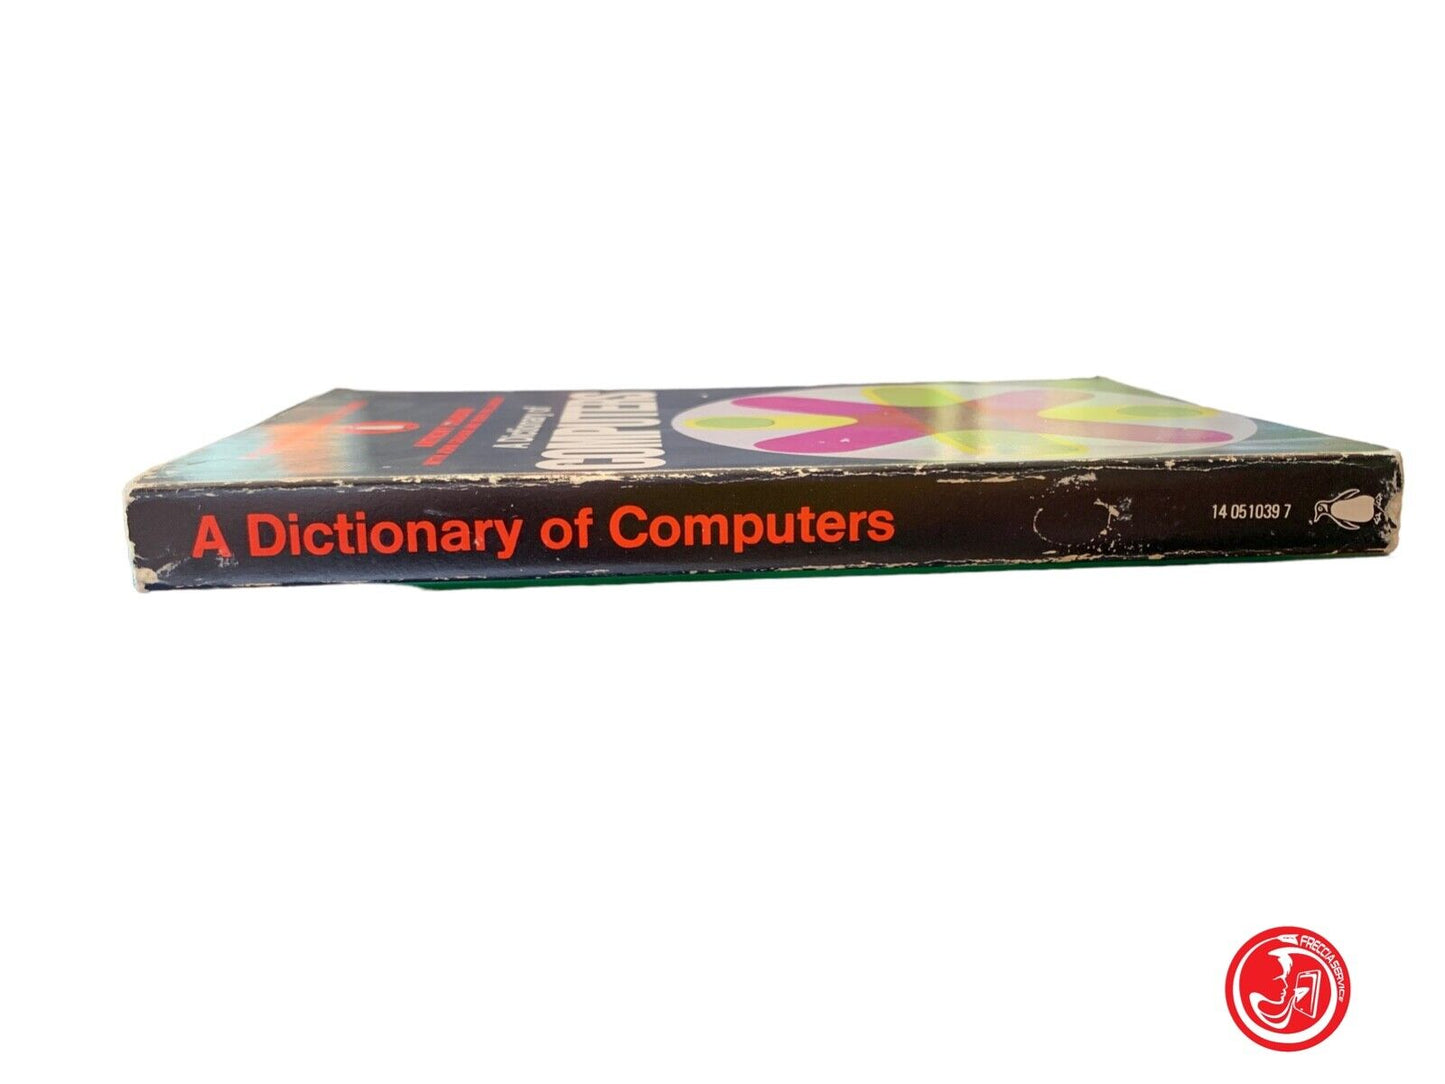 A Dictionary of Computers - Anthony Chandor - Penguin Books 1970